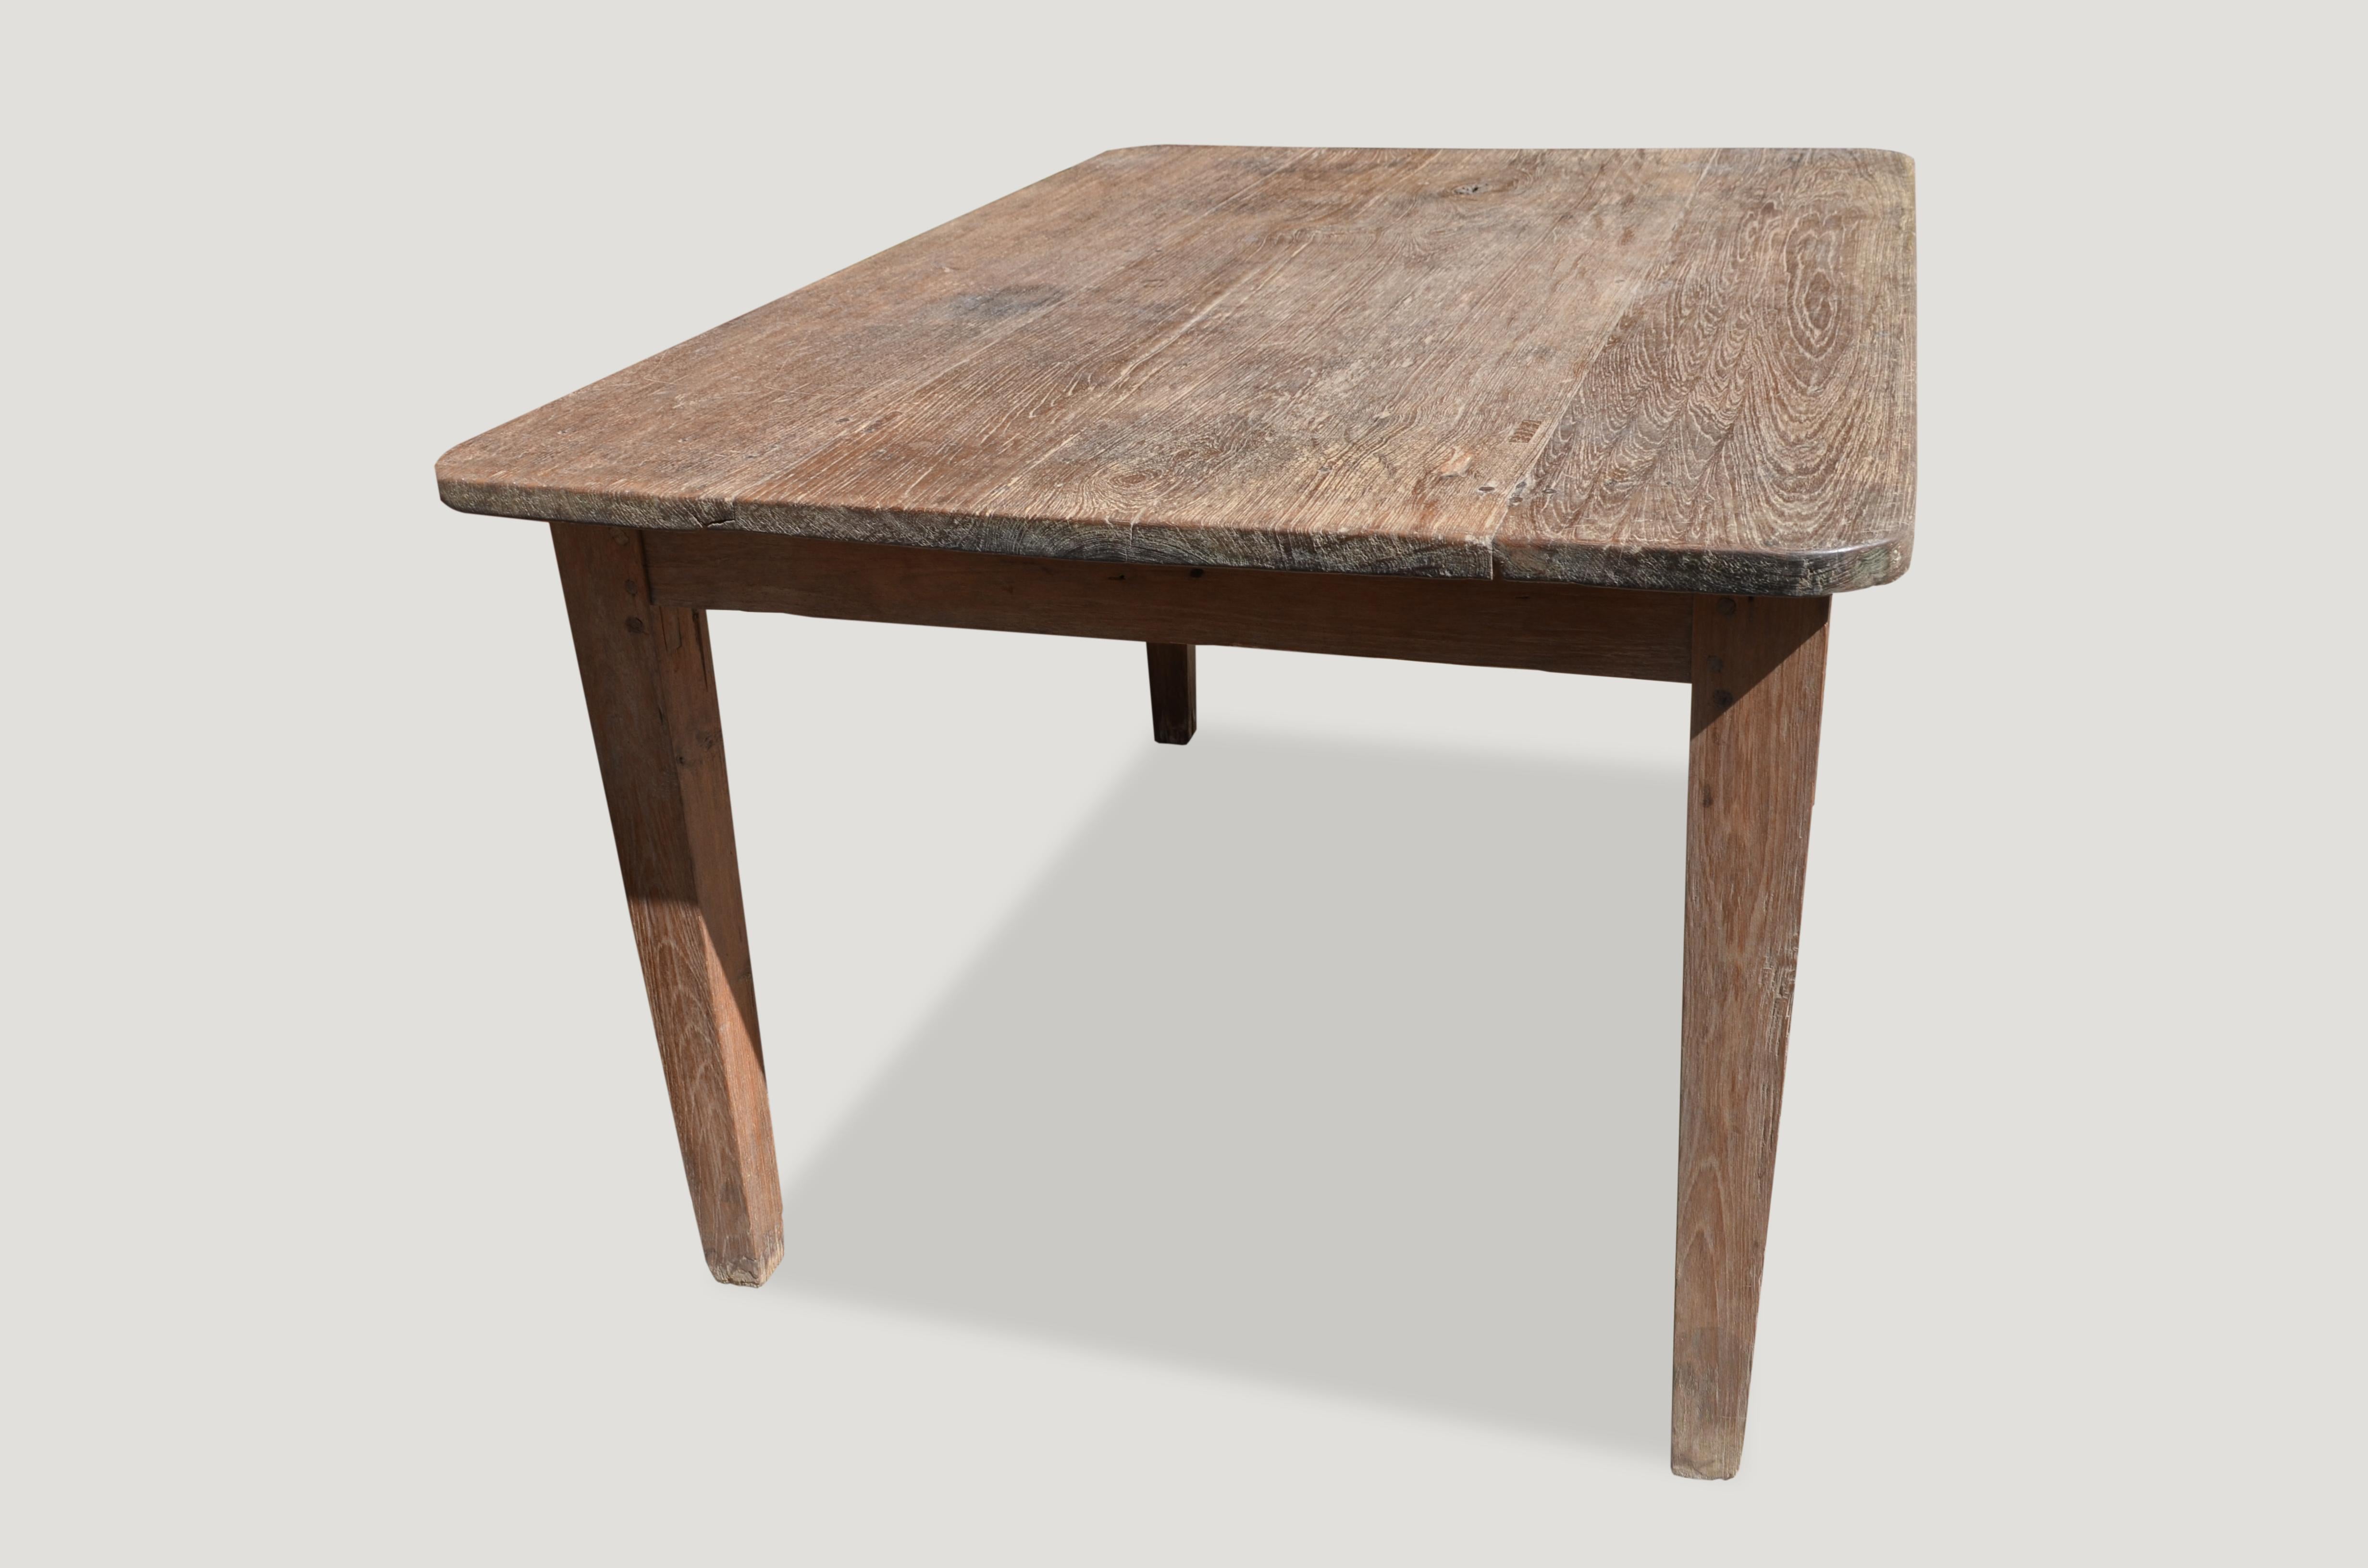 This dining table was sourced in the spirit of Wabi-sabi, a Japanese philosophy that beauty can be found in imperfection and impermanence. It’s a beauty of things modest and humble. It’s a beauty of things unconventional. It is the opposite of